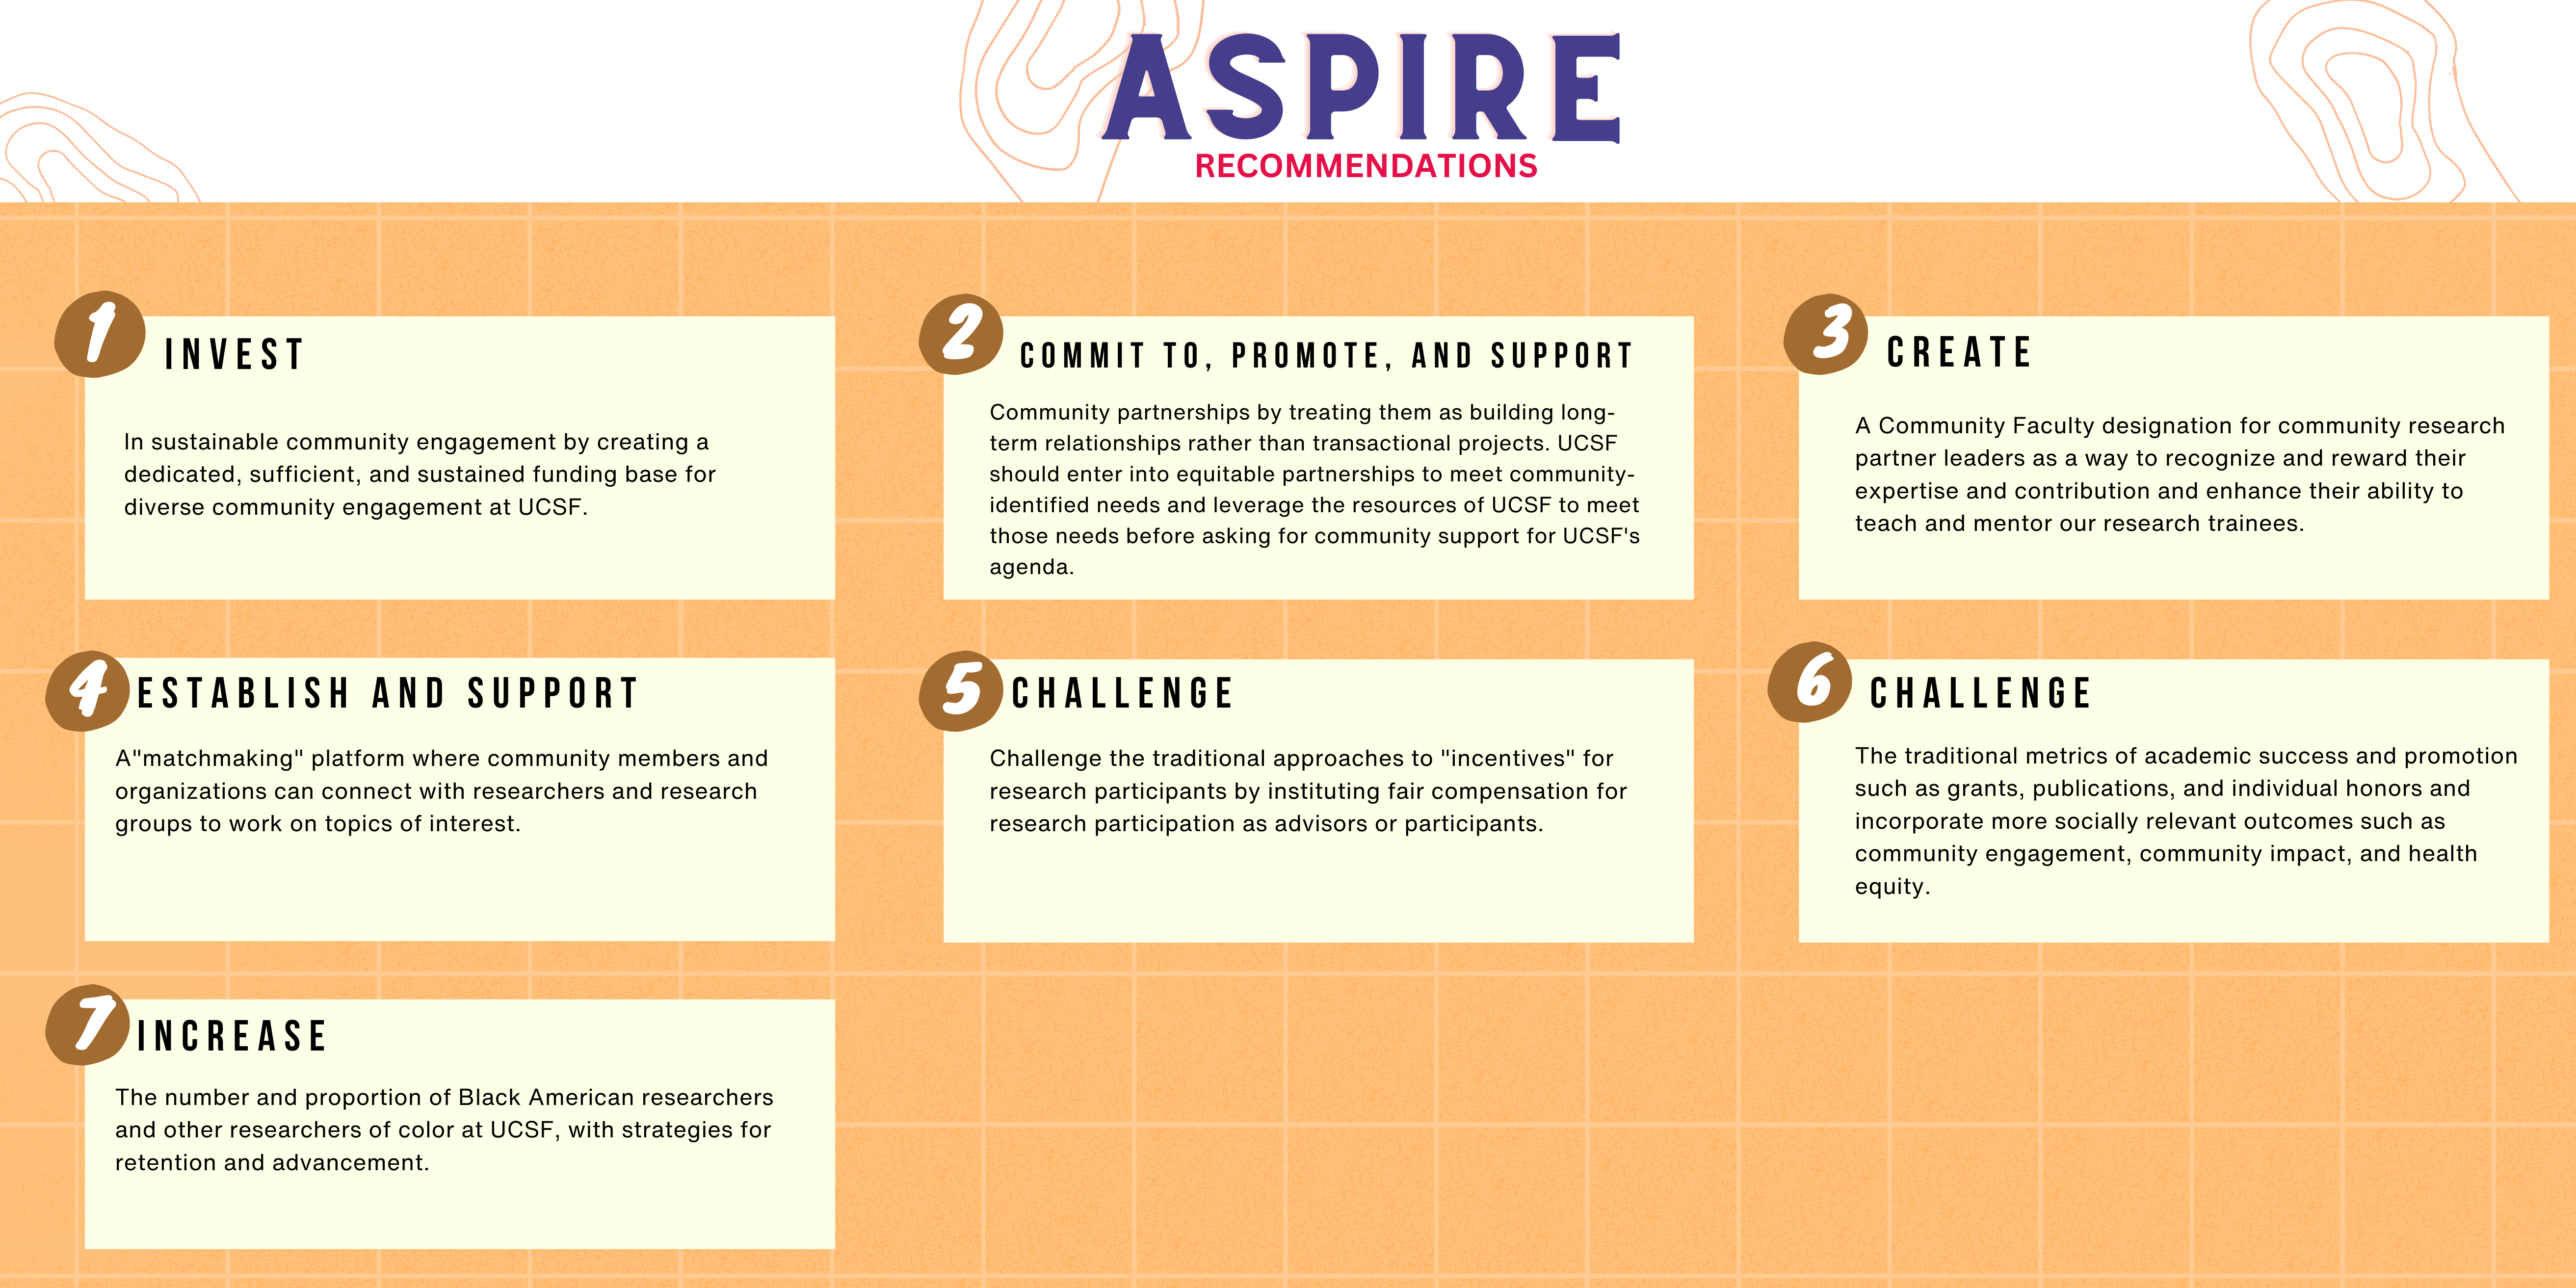  Diagram titled "Aspire Recomendations". Diagram includes invest, commit to, promote, and support, create, establish and support, challenge, and increase.